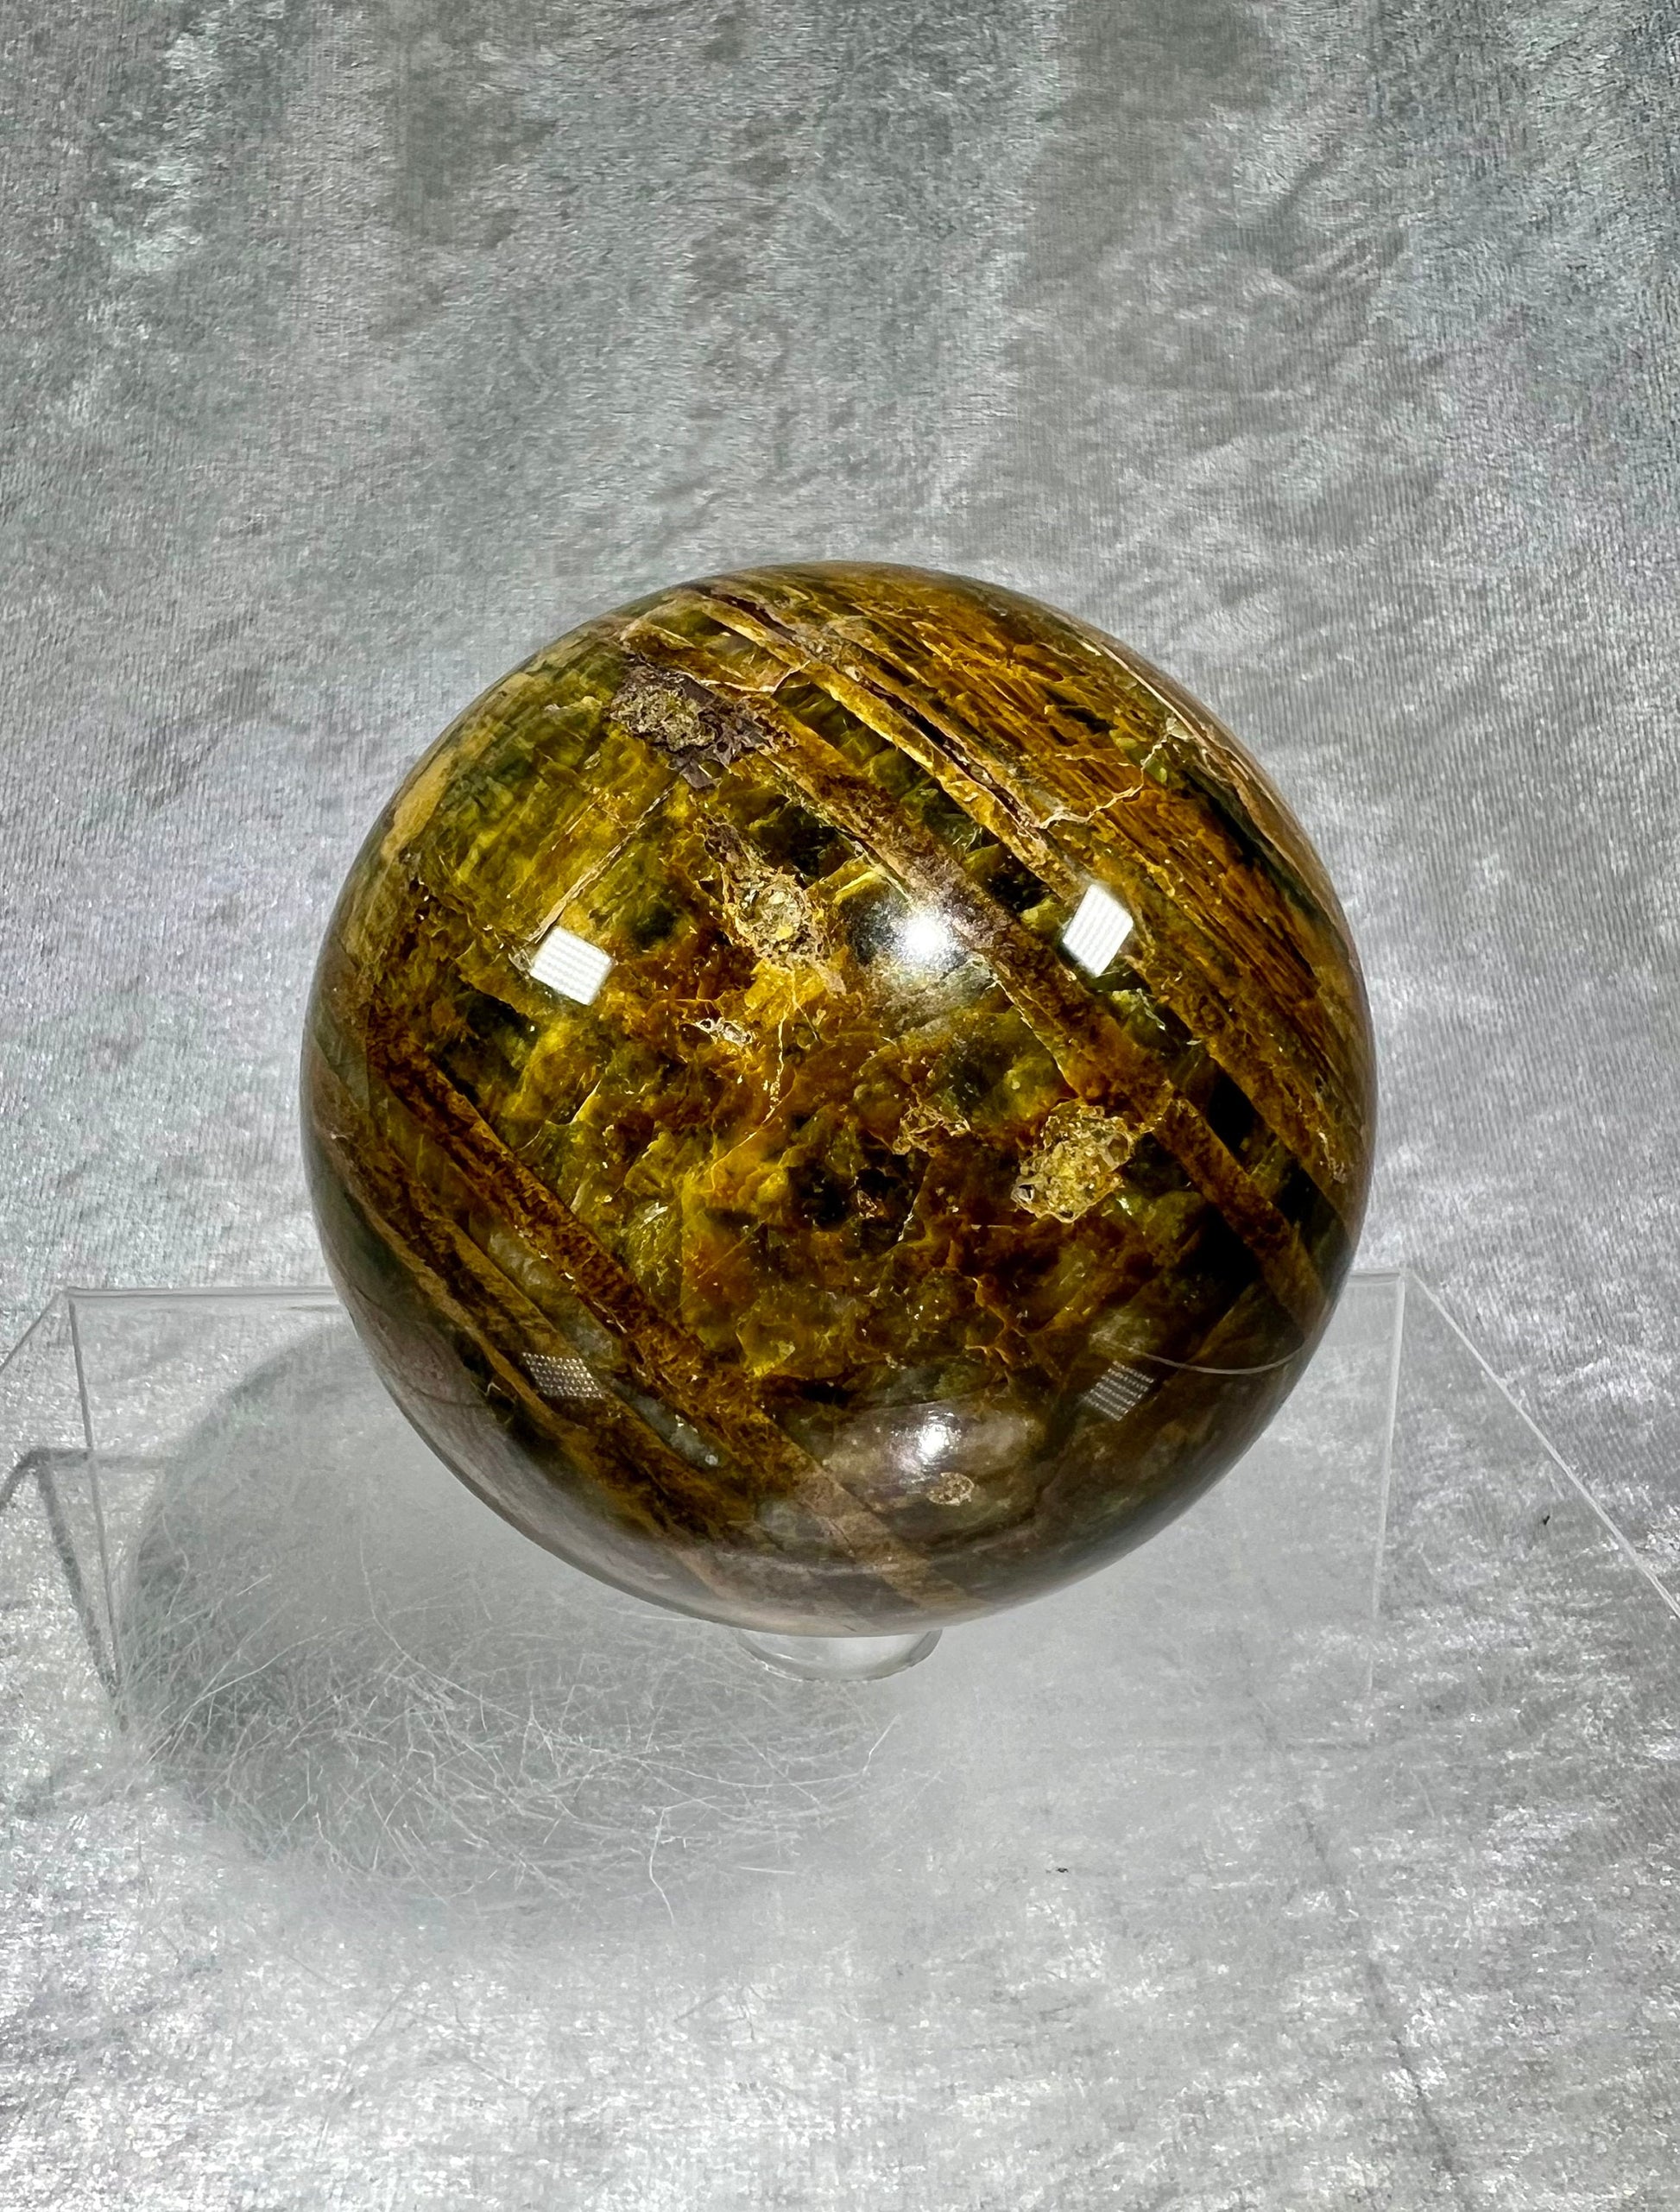 Gorgeous Large Pietersite Crystal Sphere. 74mm. Stunning Colors And Patterns. Amazing Shimmer And Flash!